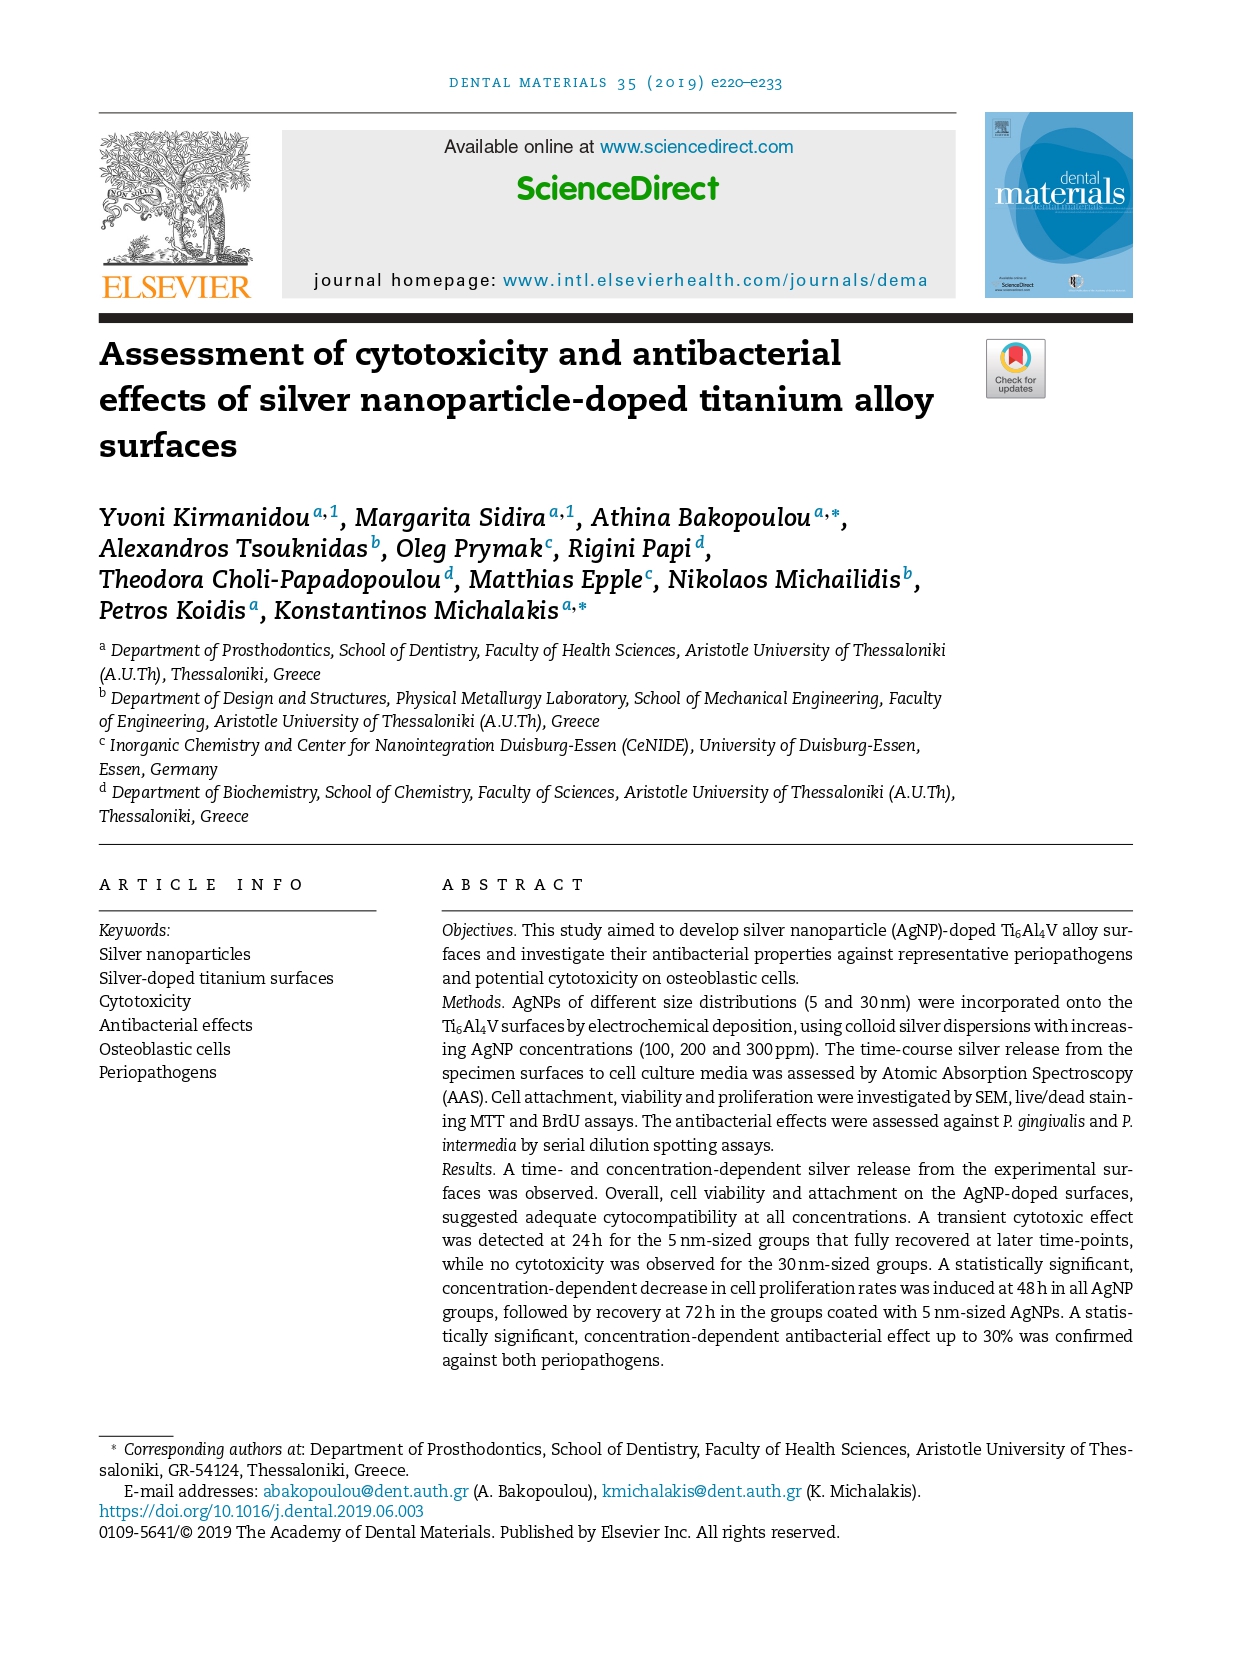 Assessment of cytotoxicity and antibacterial effects of silver nanoparticle-doped titanium alloy surfaces_page-0001.jpg